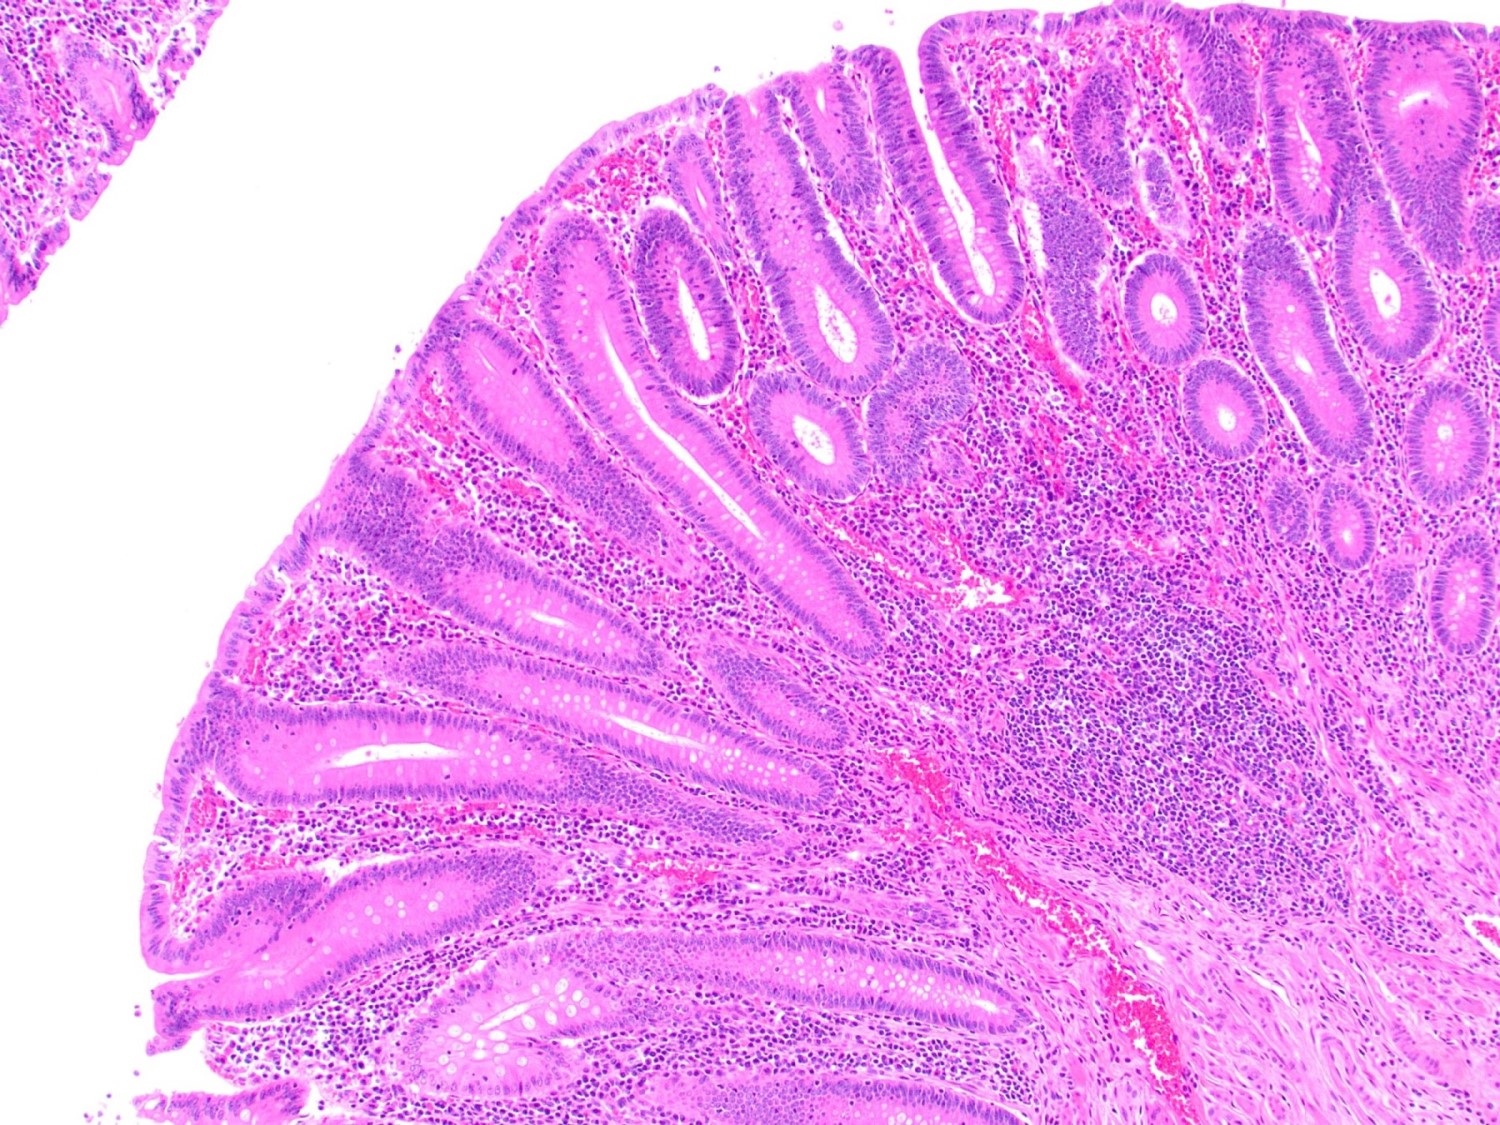 Tubular glands with elongated, hyperchromatic nuclei and crowded glands